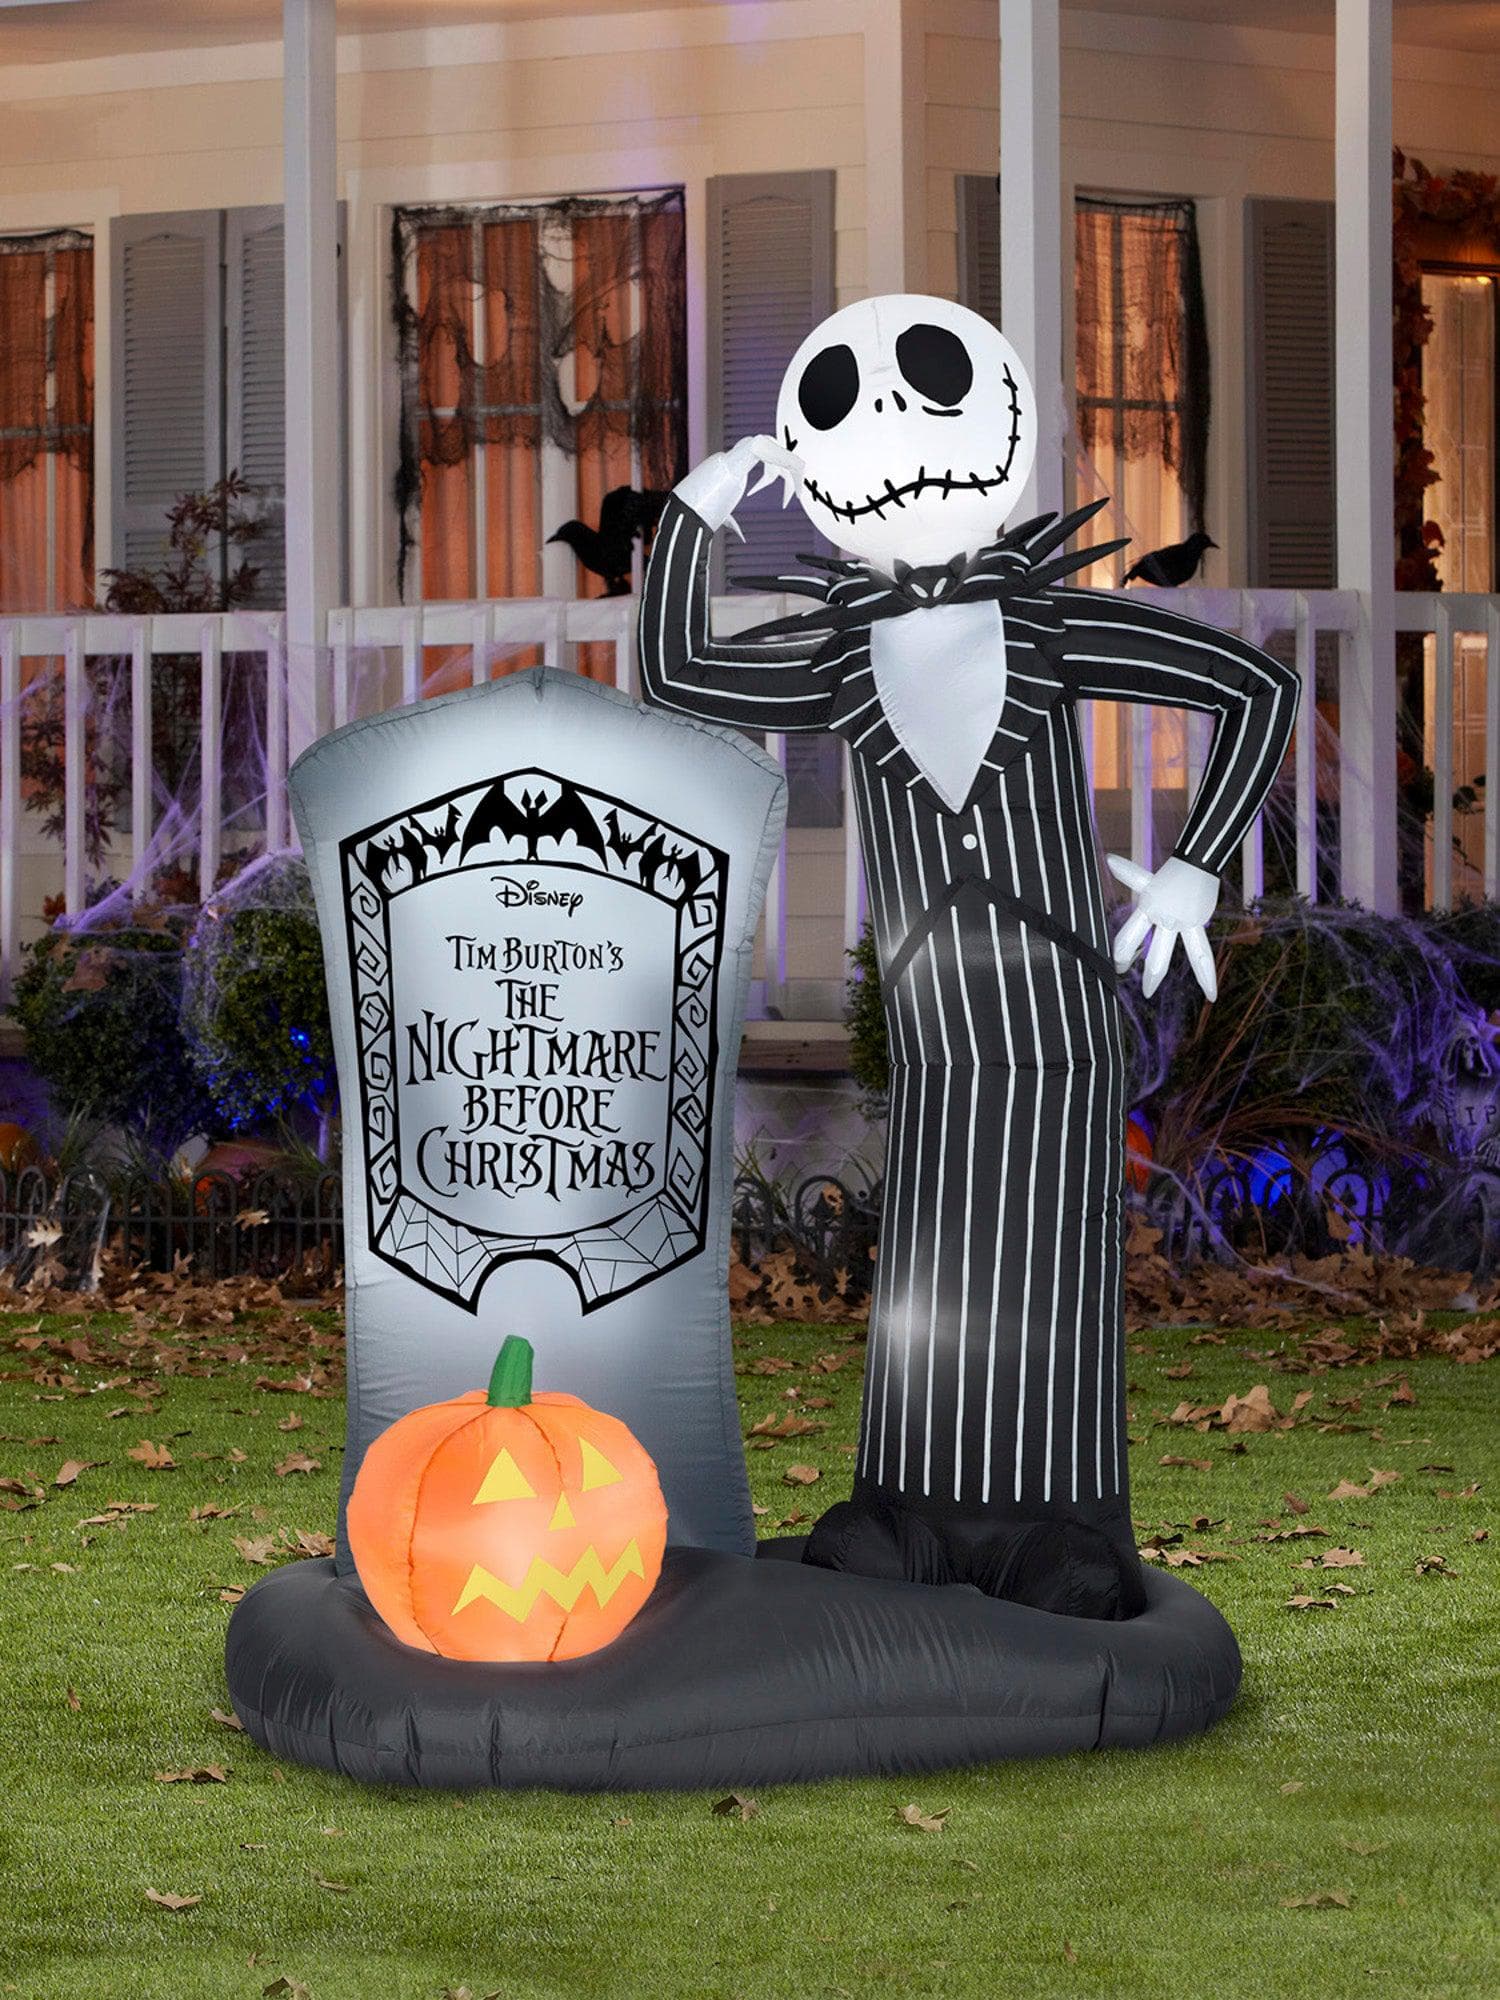 6 Foot The Nightmare Before Christmas Jack Skellington's Tombstone Light Up Halloween Inflatable Lawn Decor - costumes.com